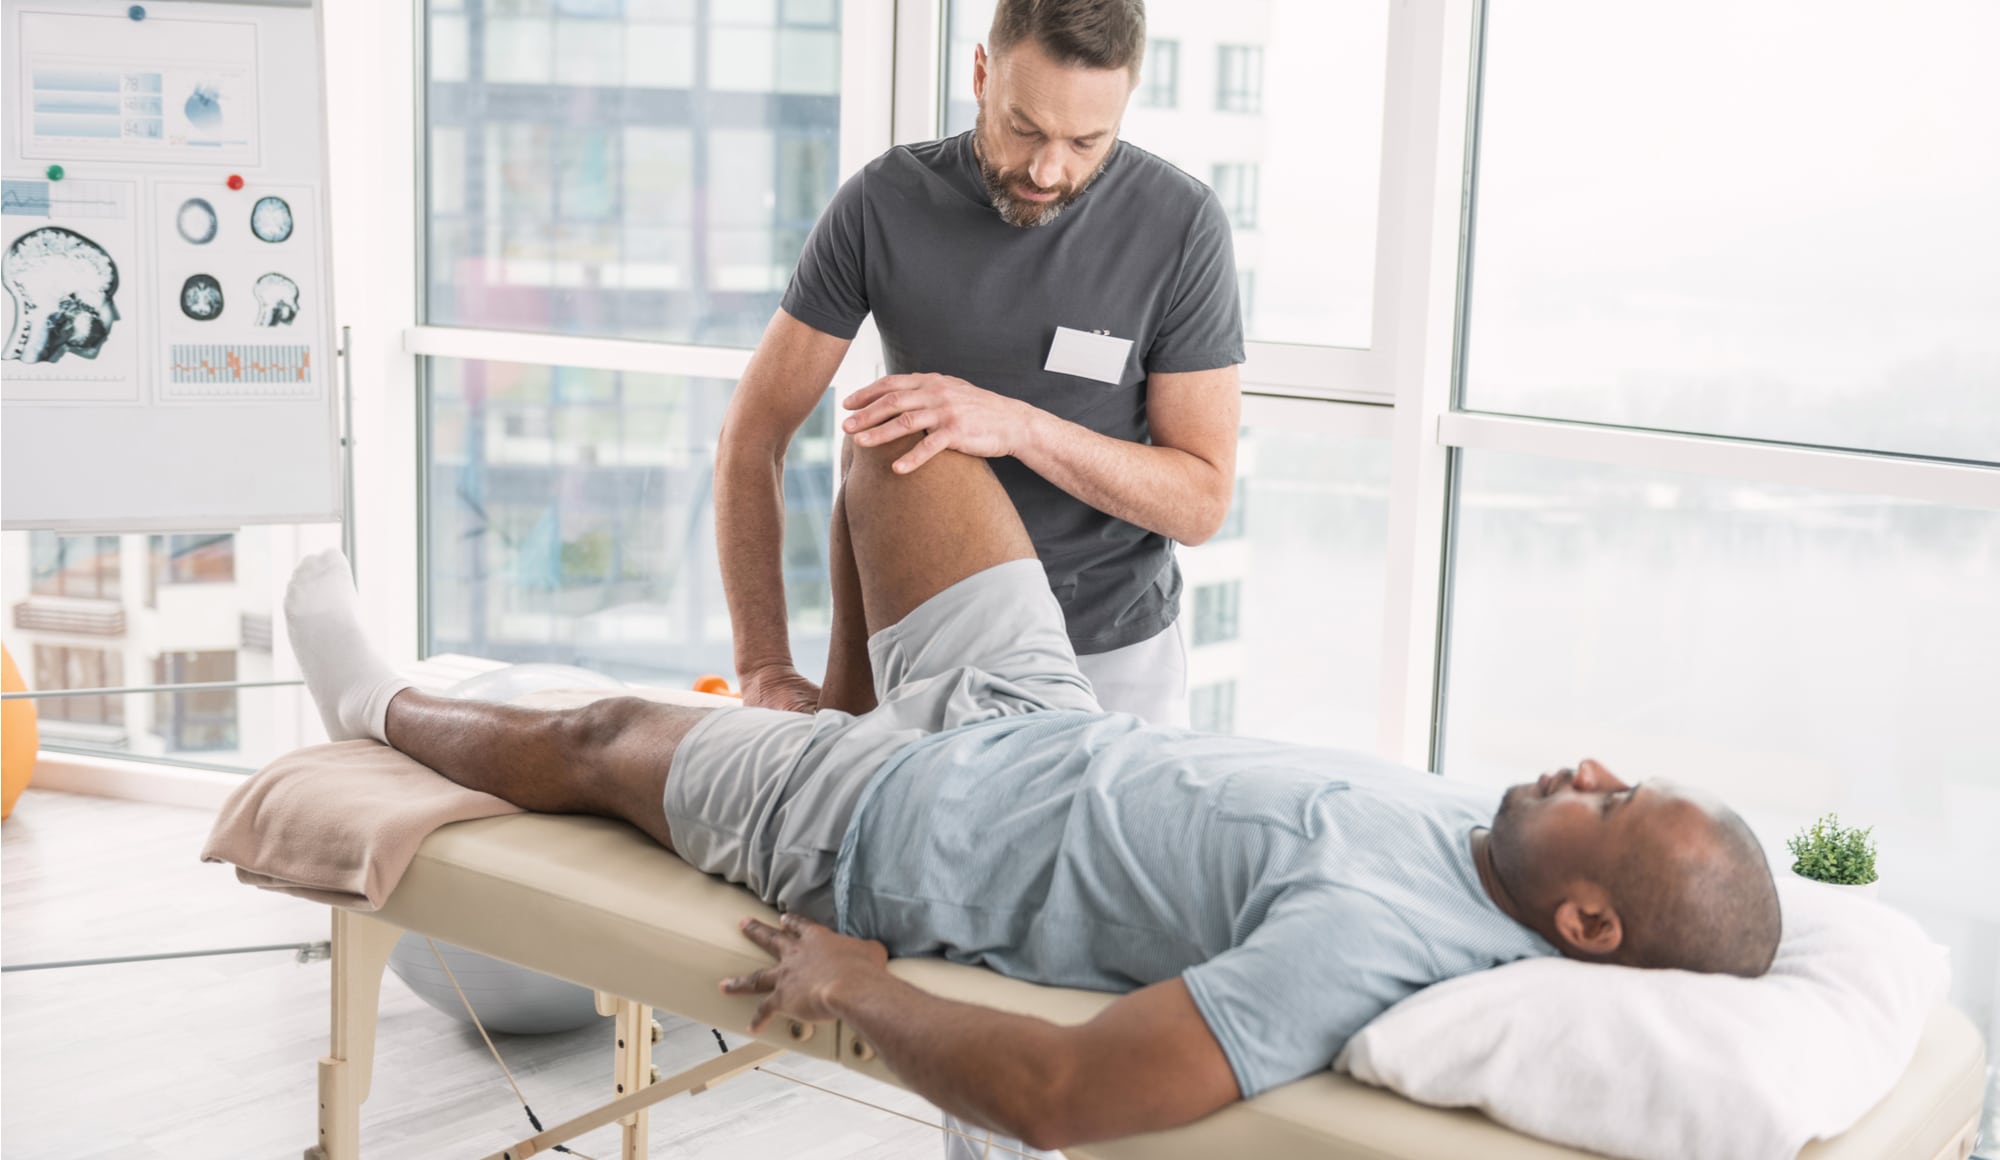 Opioid Alternatives: How to Find Pain Medications That Aren't Addictive Pathfinders - A middle-aged man is engaging in physical therapy with a professional physical therapist as one of the available opioid alternatives to manage pain and improve the healing process instead of abusing opioid medications.